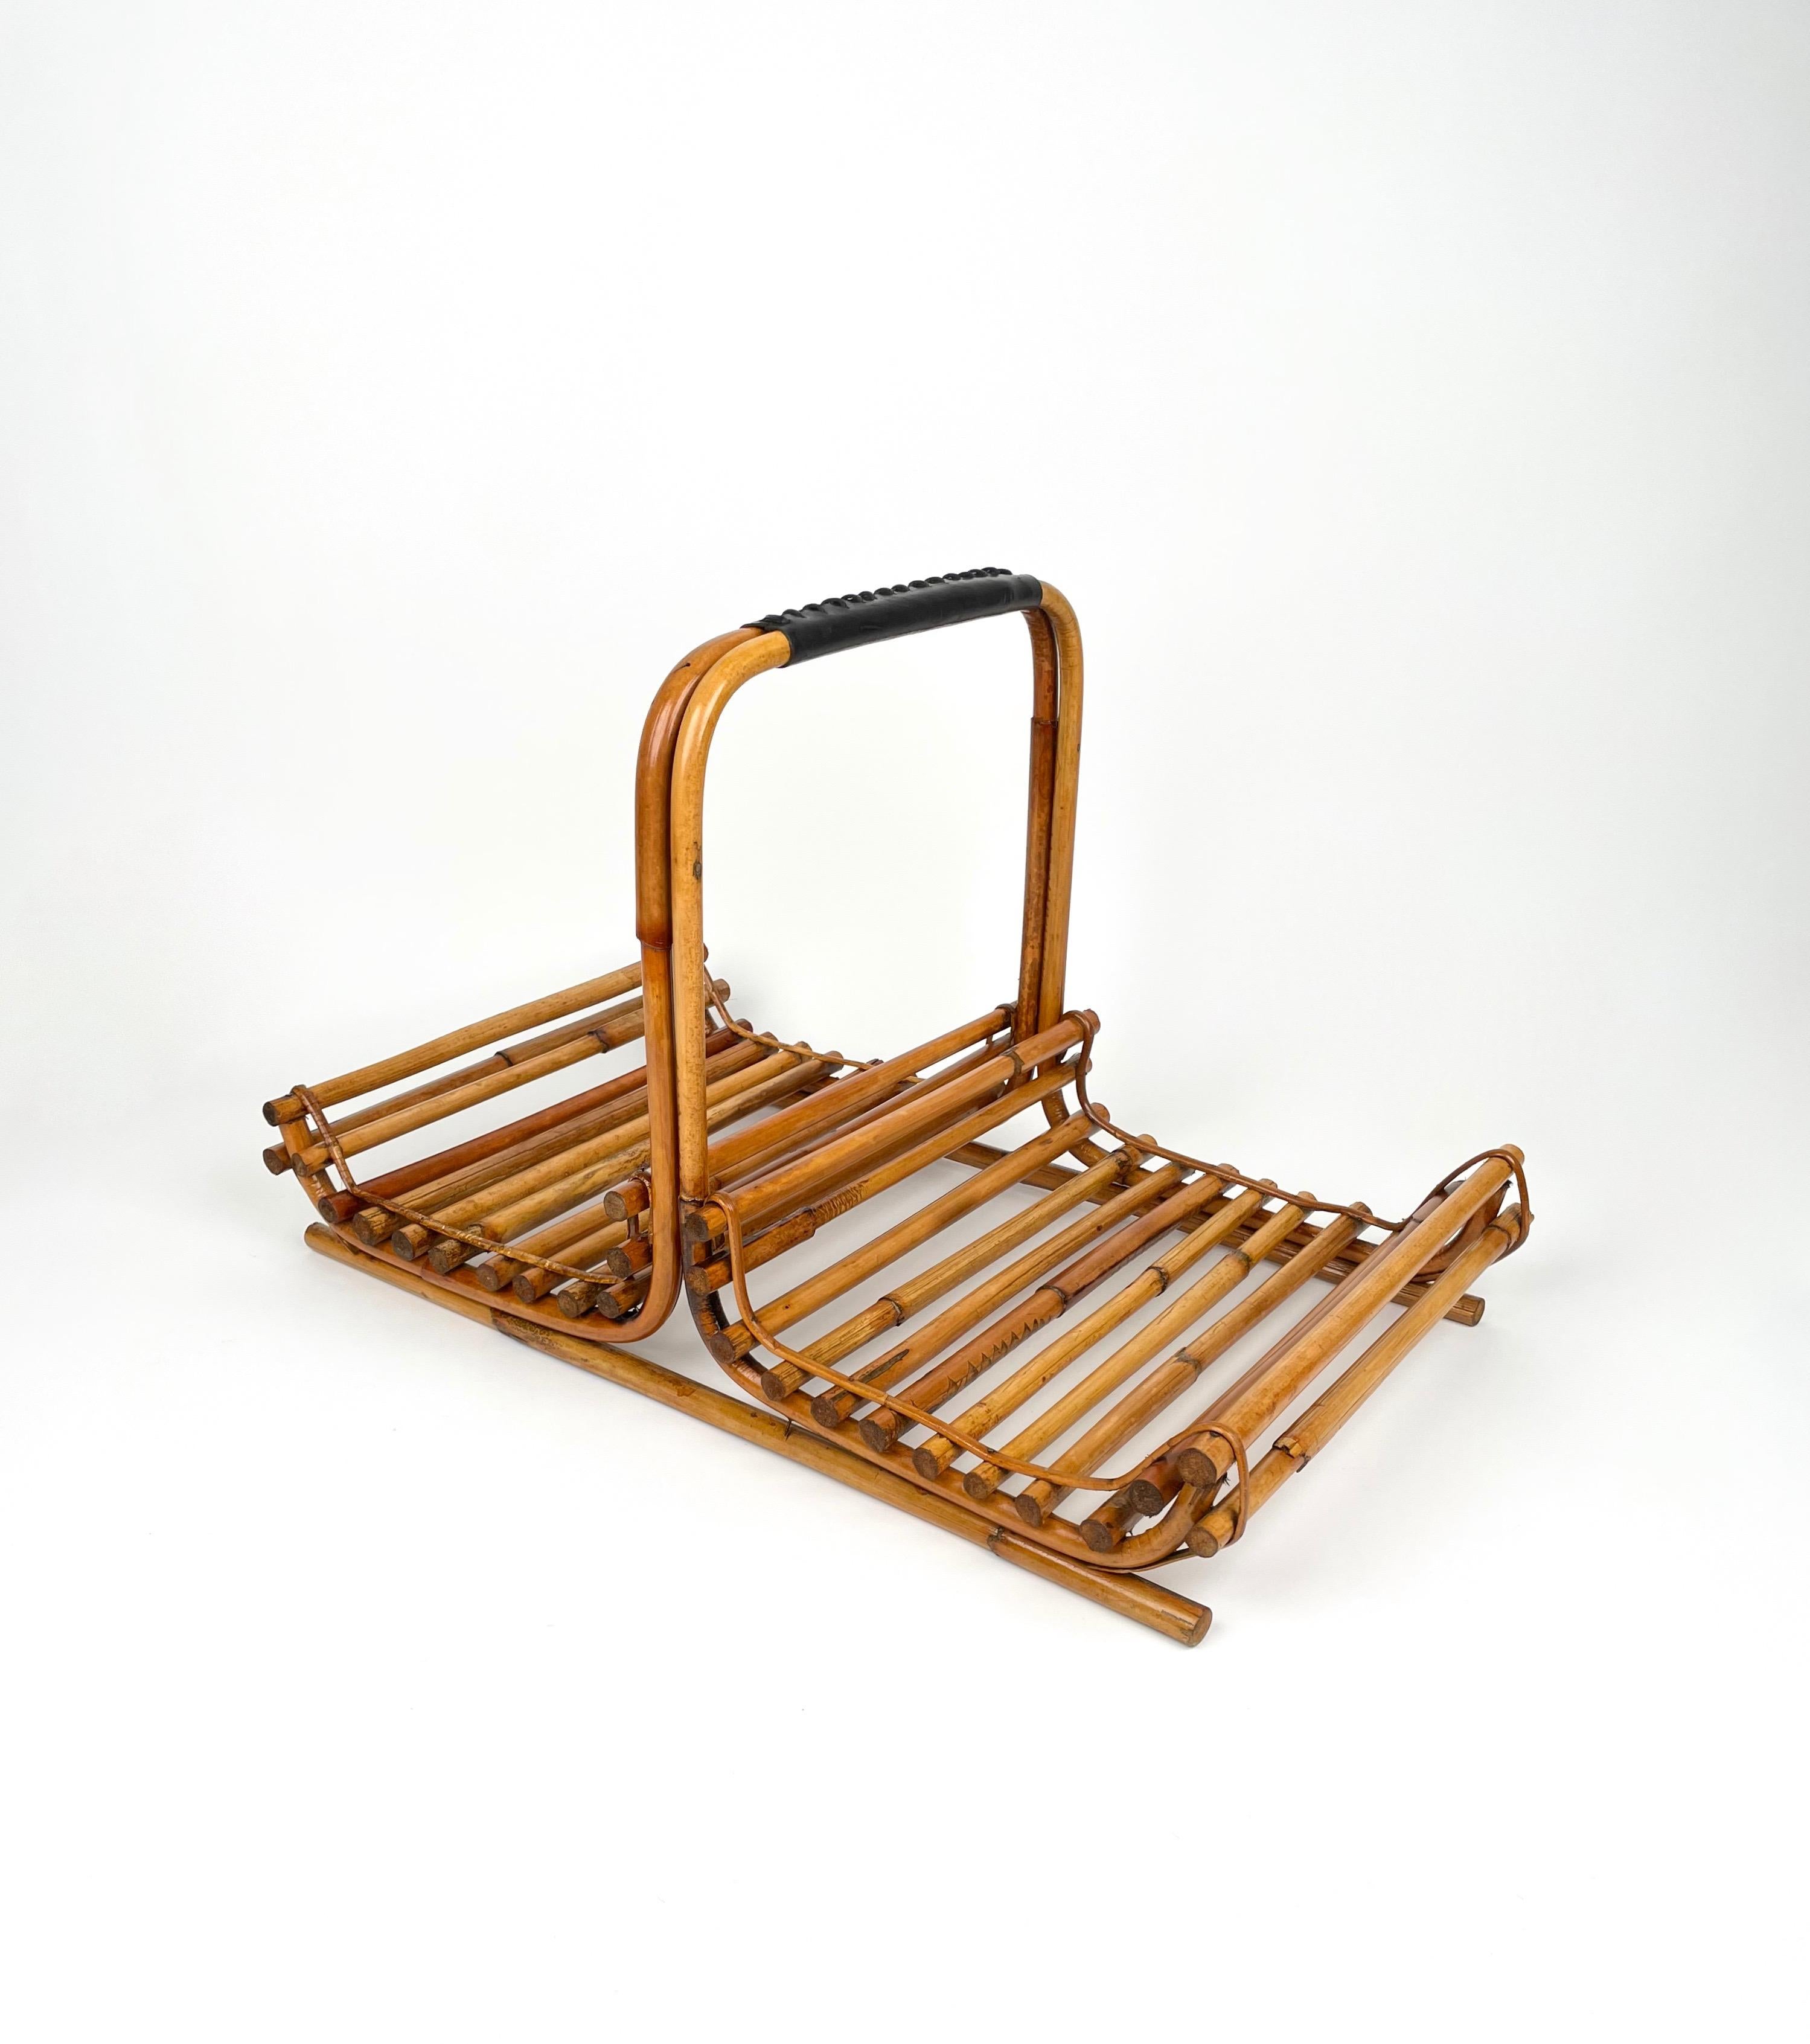 Italian Midcentury Bamboo and Leather Magazine Rack, Italy, 1960s For Sale